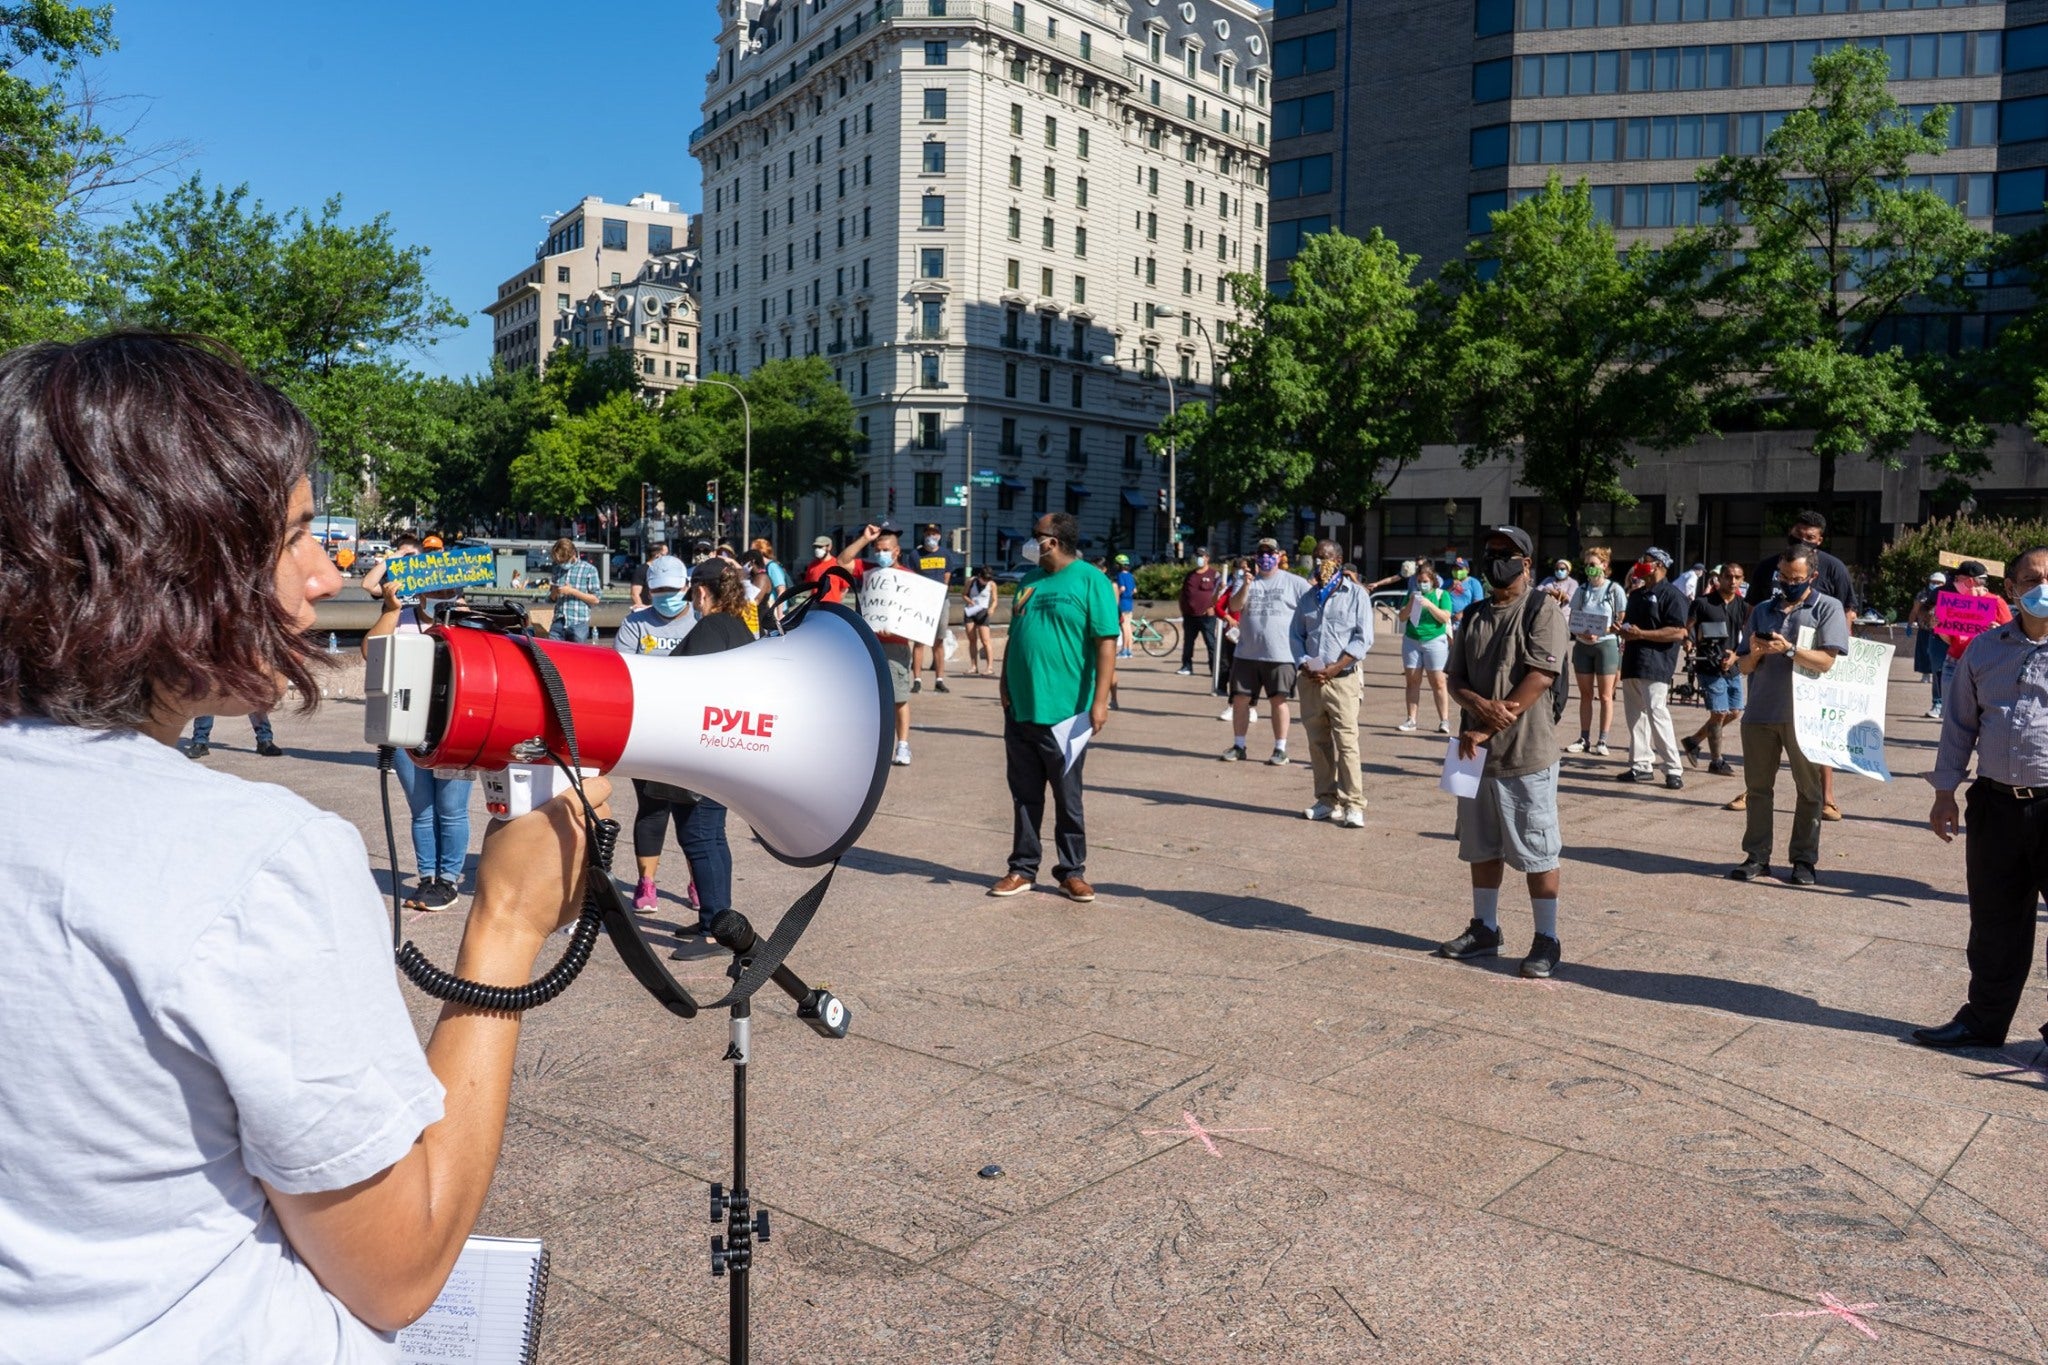 Person speaks into a megaphone at a protest.